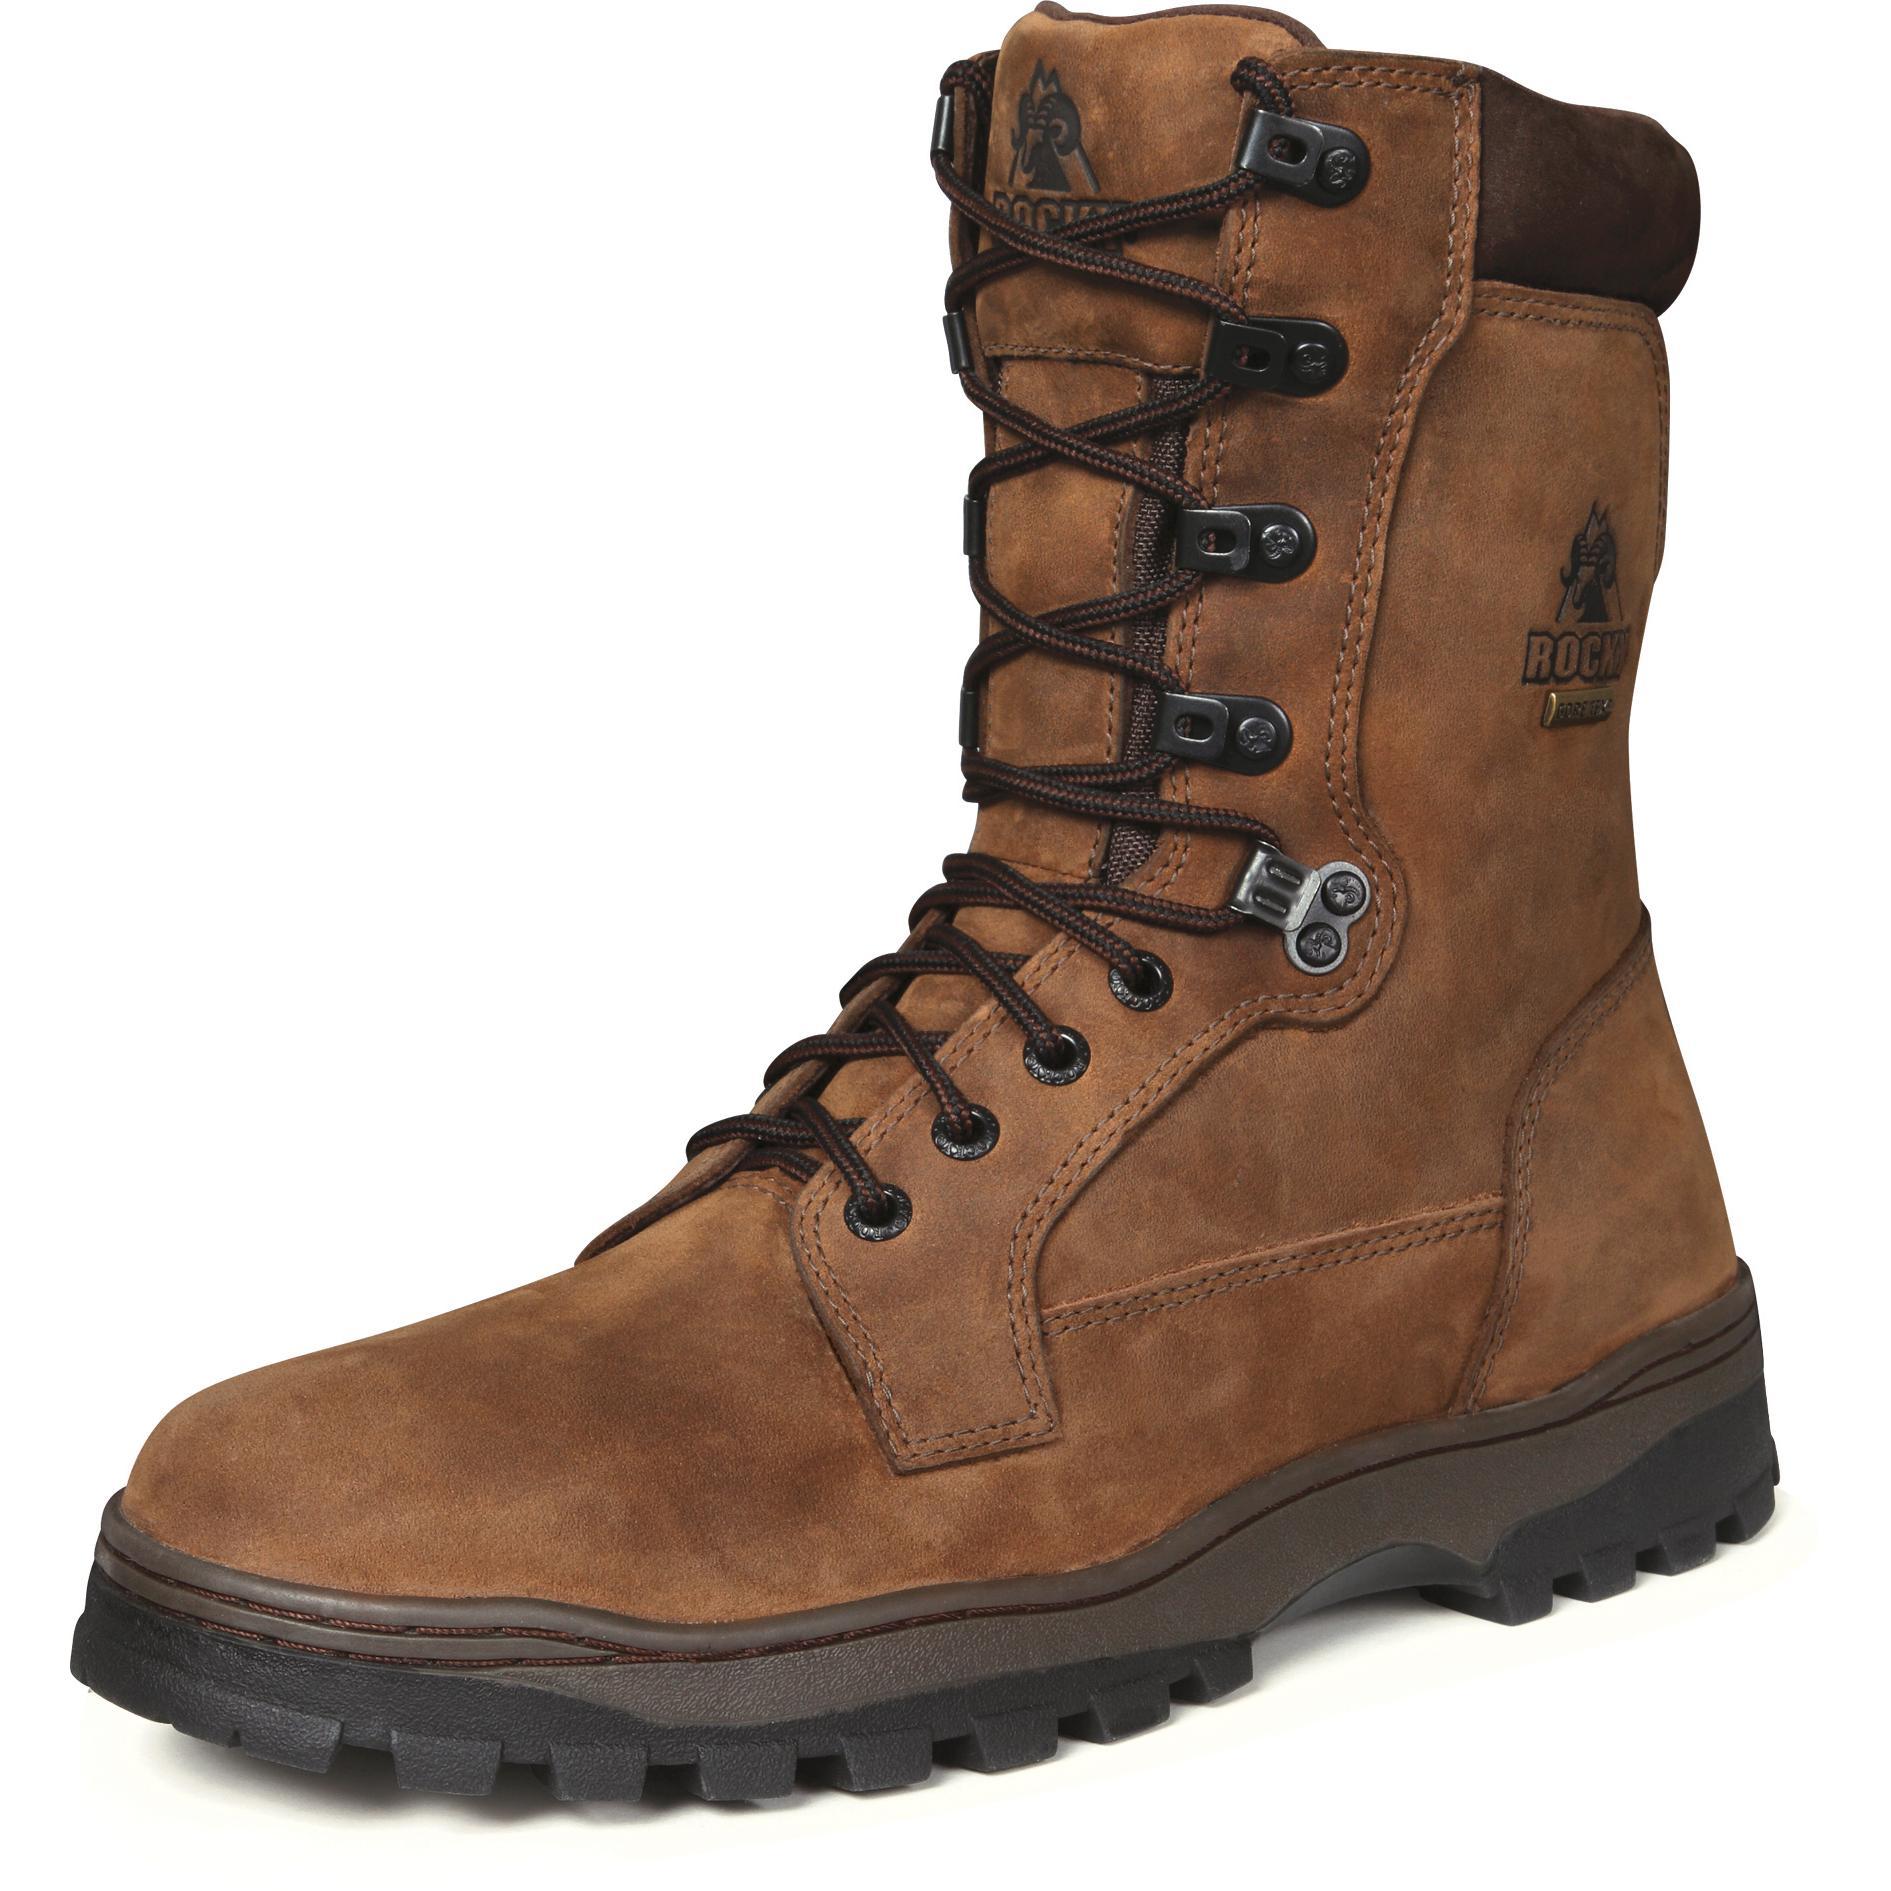 9” Rocky Outback GORE-TEX® Waterproof Hunting Boots - Style #8732